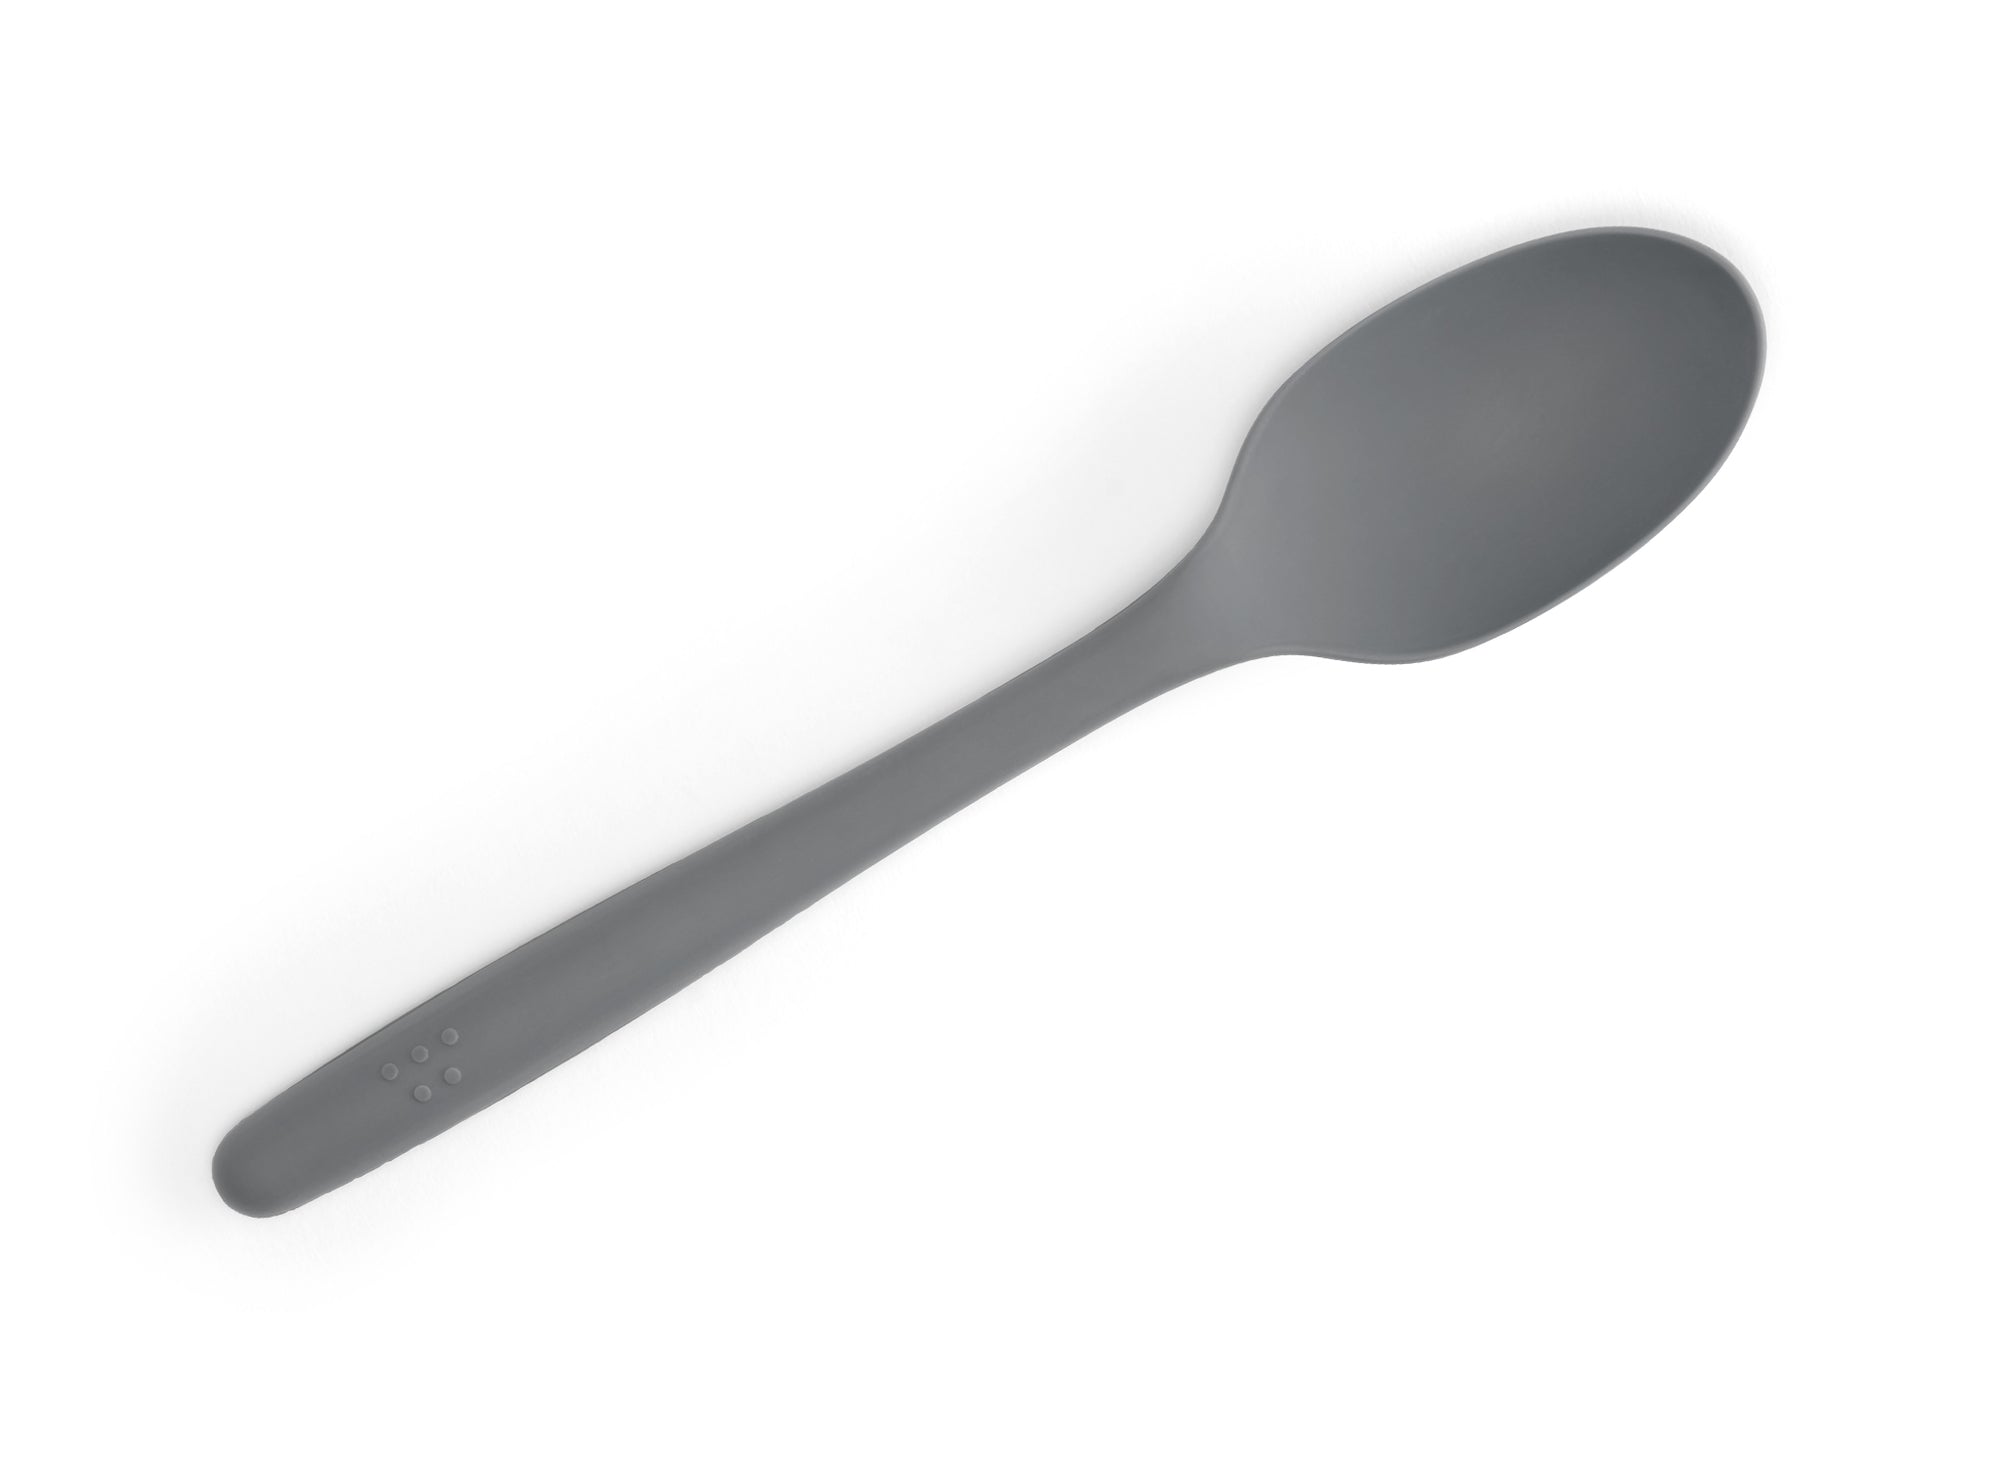 A Grey Misen Mixing Spoon seen from above on a white background.